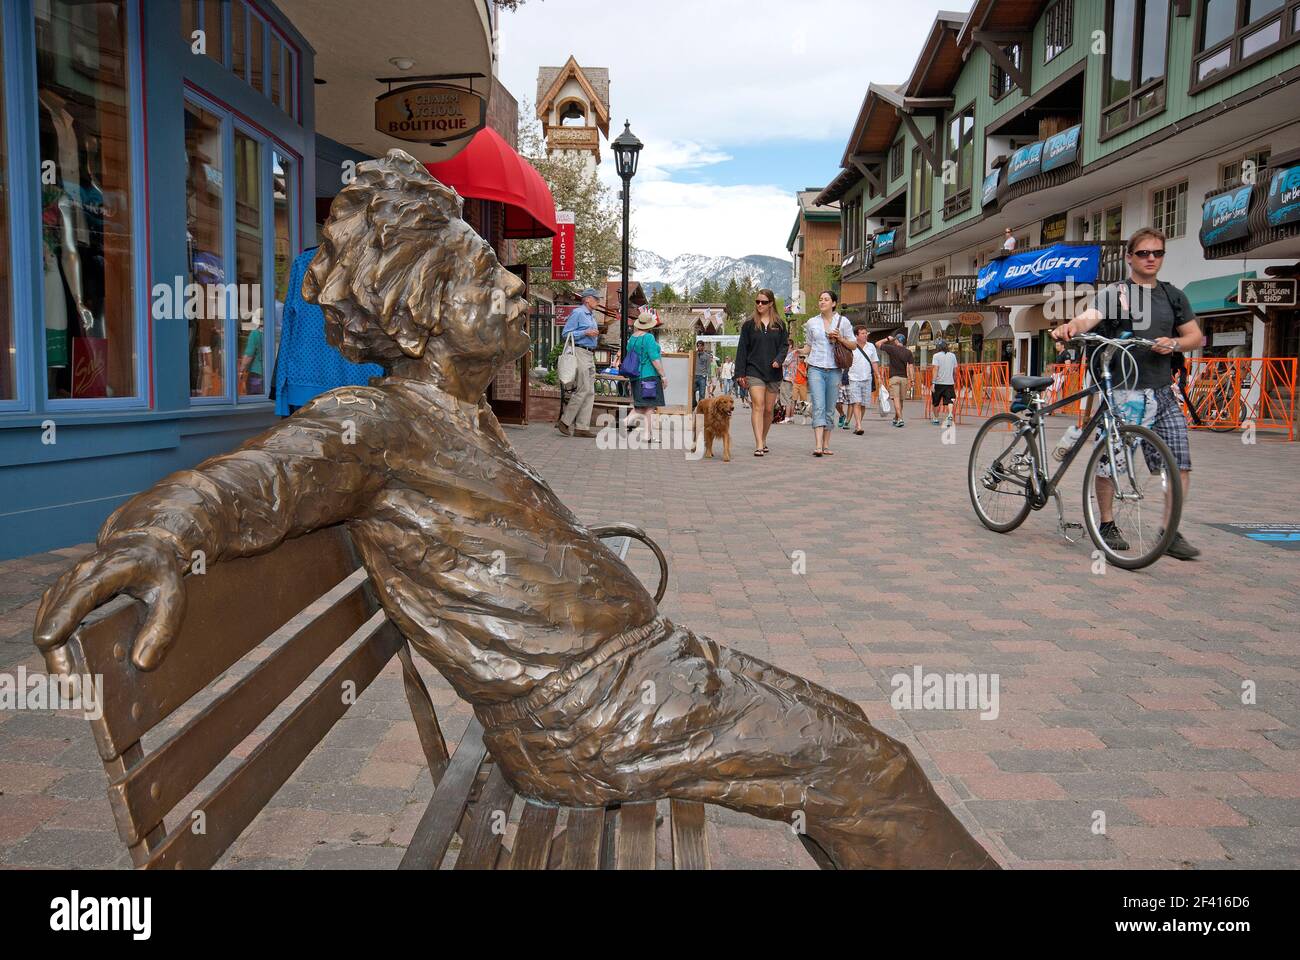 Full-sized bronze statue of Albert Einstein (by the sculptor Gary Lee Price) in Vail, Eagle County, Colorado, USA Stock Photo